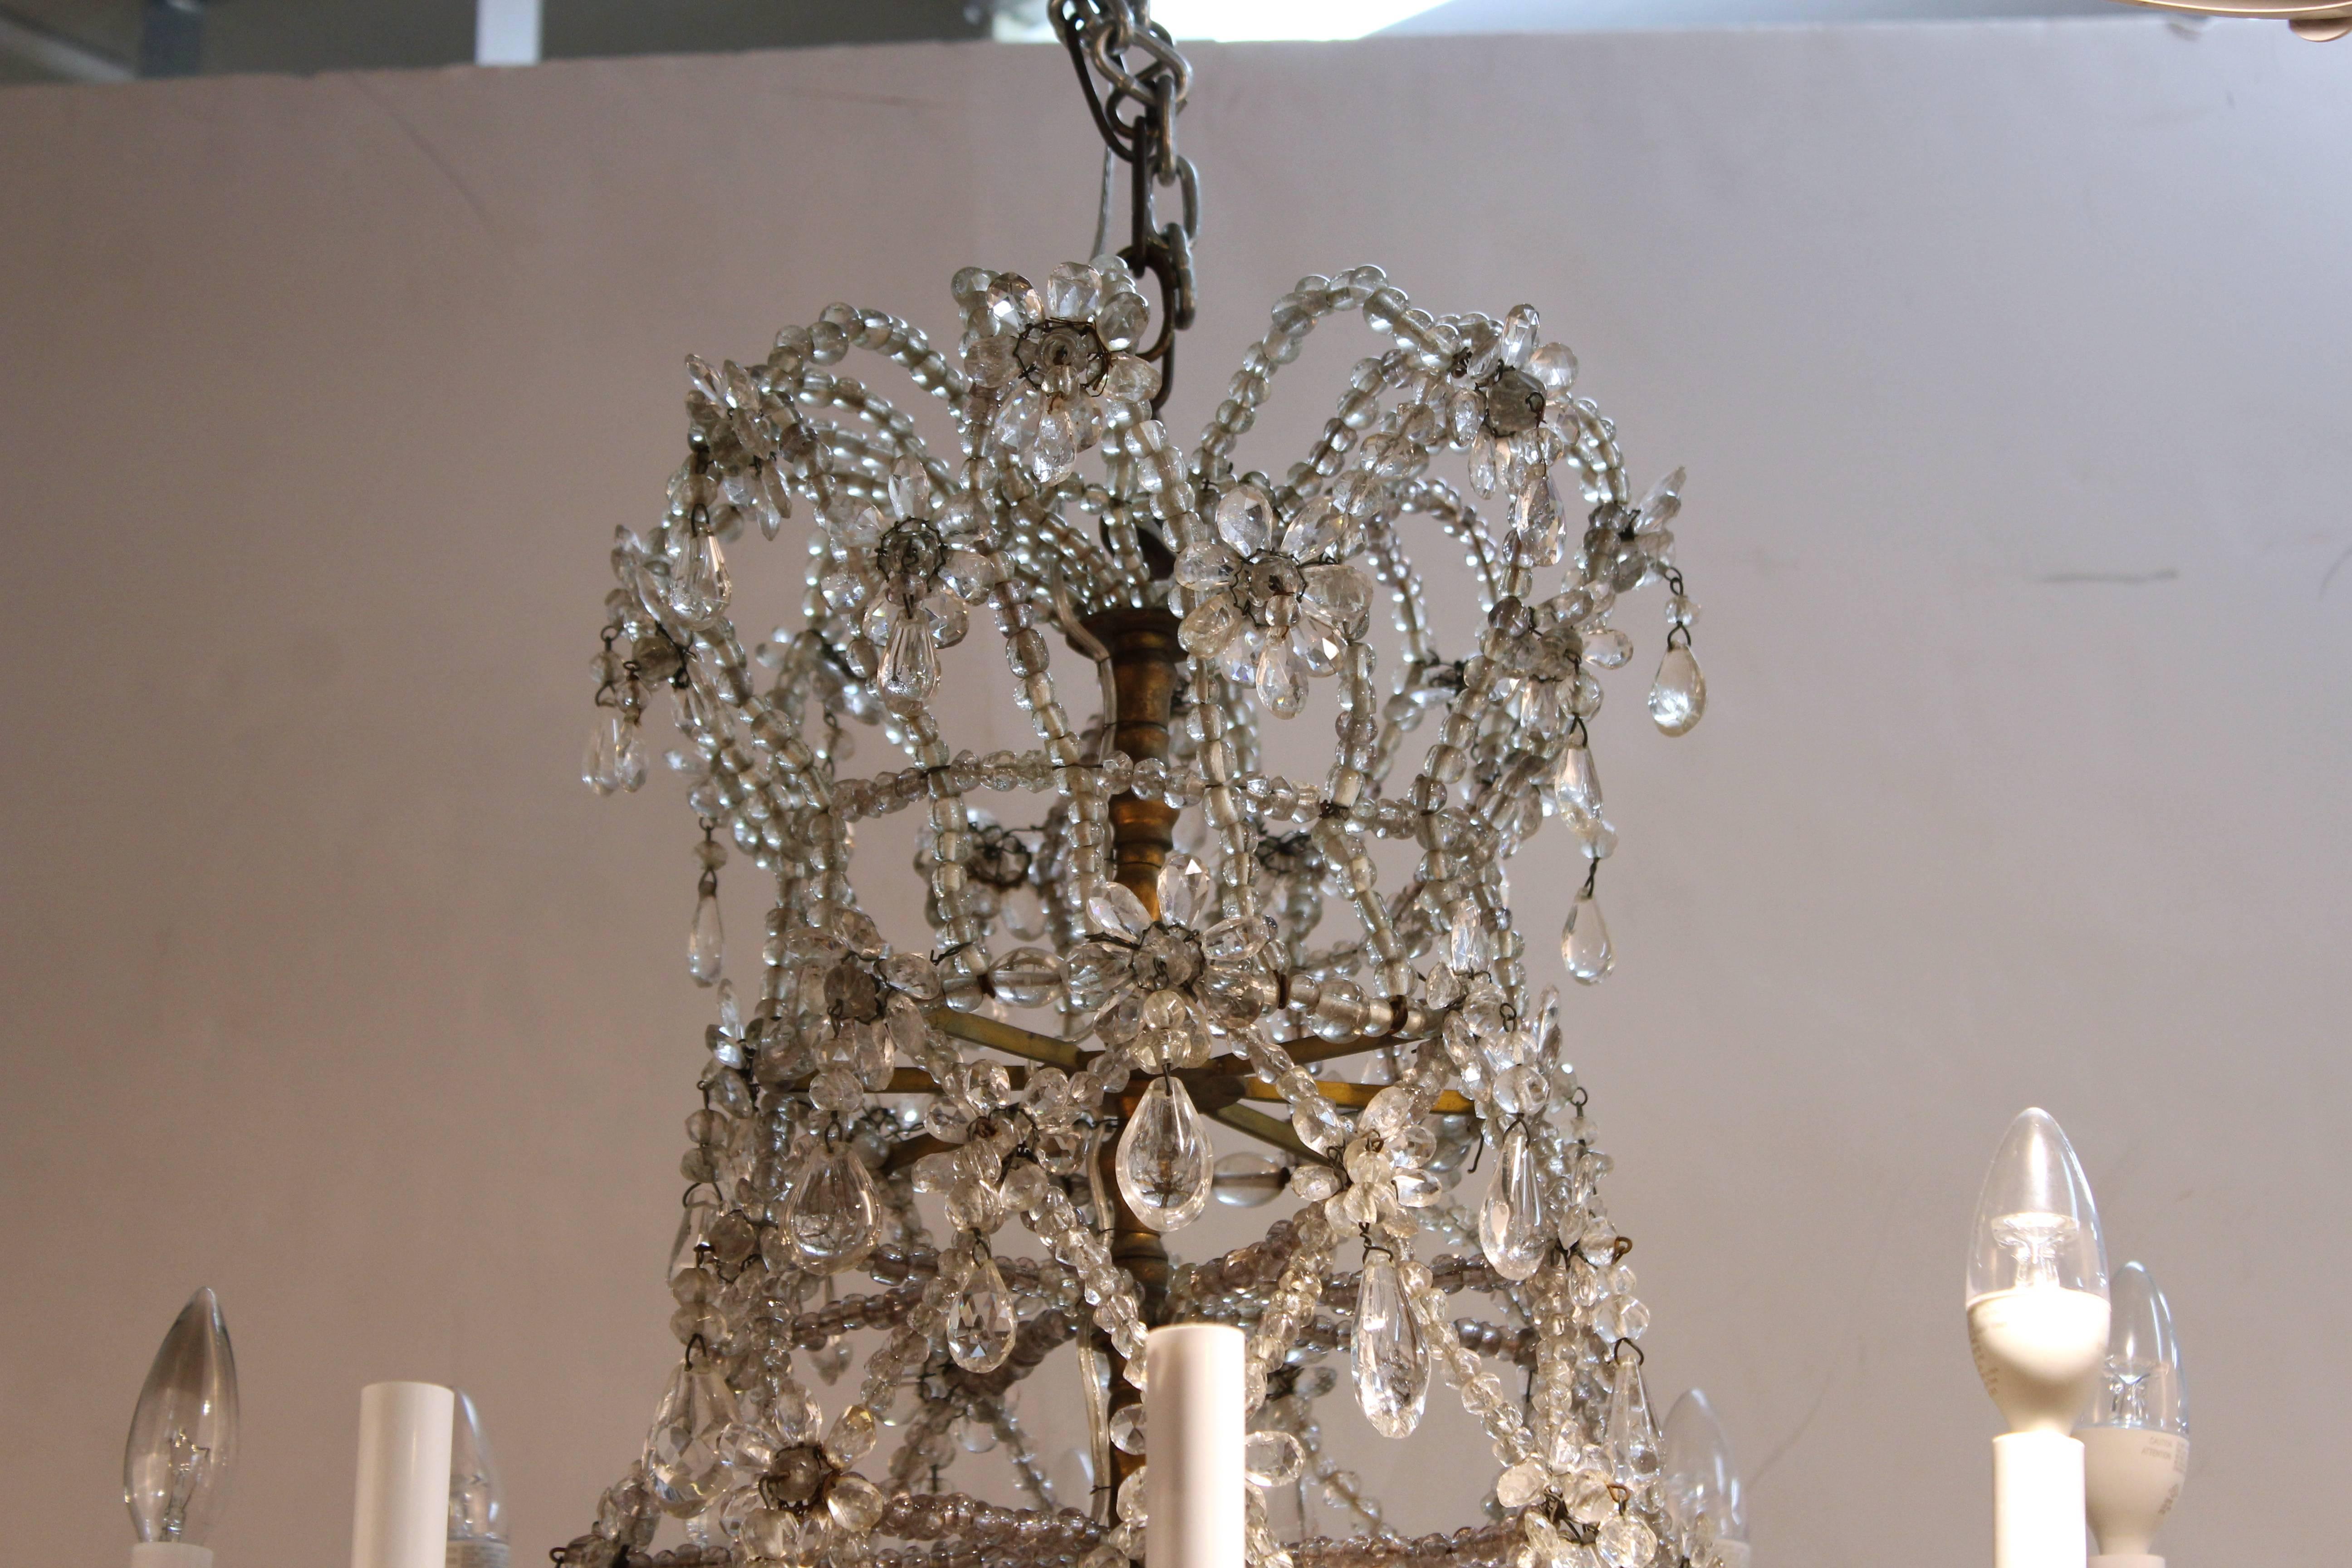 A rock crystal chandler dating between the 18th and 19th century crafted in Austria. The chandelier features eight arms with faux candle sockets. The patinated brass frame is adorned in a net of crystal beads with rosettes and clear drops. The